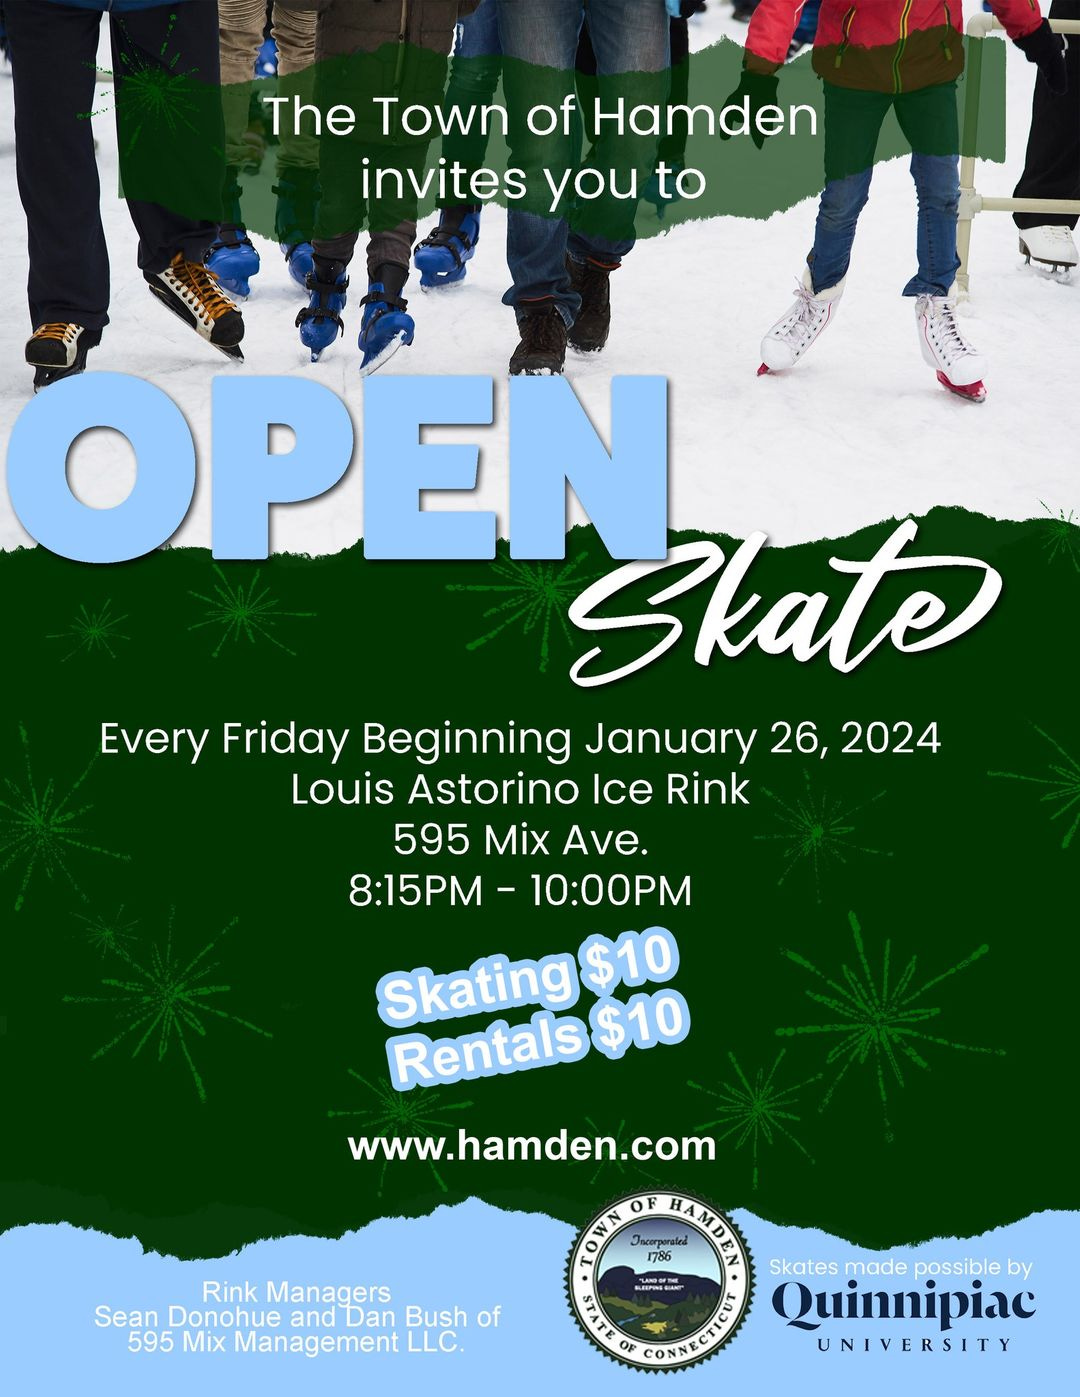 May be an image of ‎5 people, people skating and ‎text that says '‎The Town of Hamden invites you to اله OPEN Skate Every Friday Beginning January 26,2024 Louis Astorino Ice Rink 595 Mix Ave. 8:15PM- 10:00PM Skating $10 Rentals $10 www.hamden.com Rink Managers Sean Donohue and Dan Bush of 595 Mix Management LLC. Skates made possible by Quinnipiac UNIVERSITY‎'‎‎